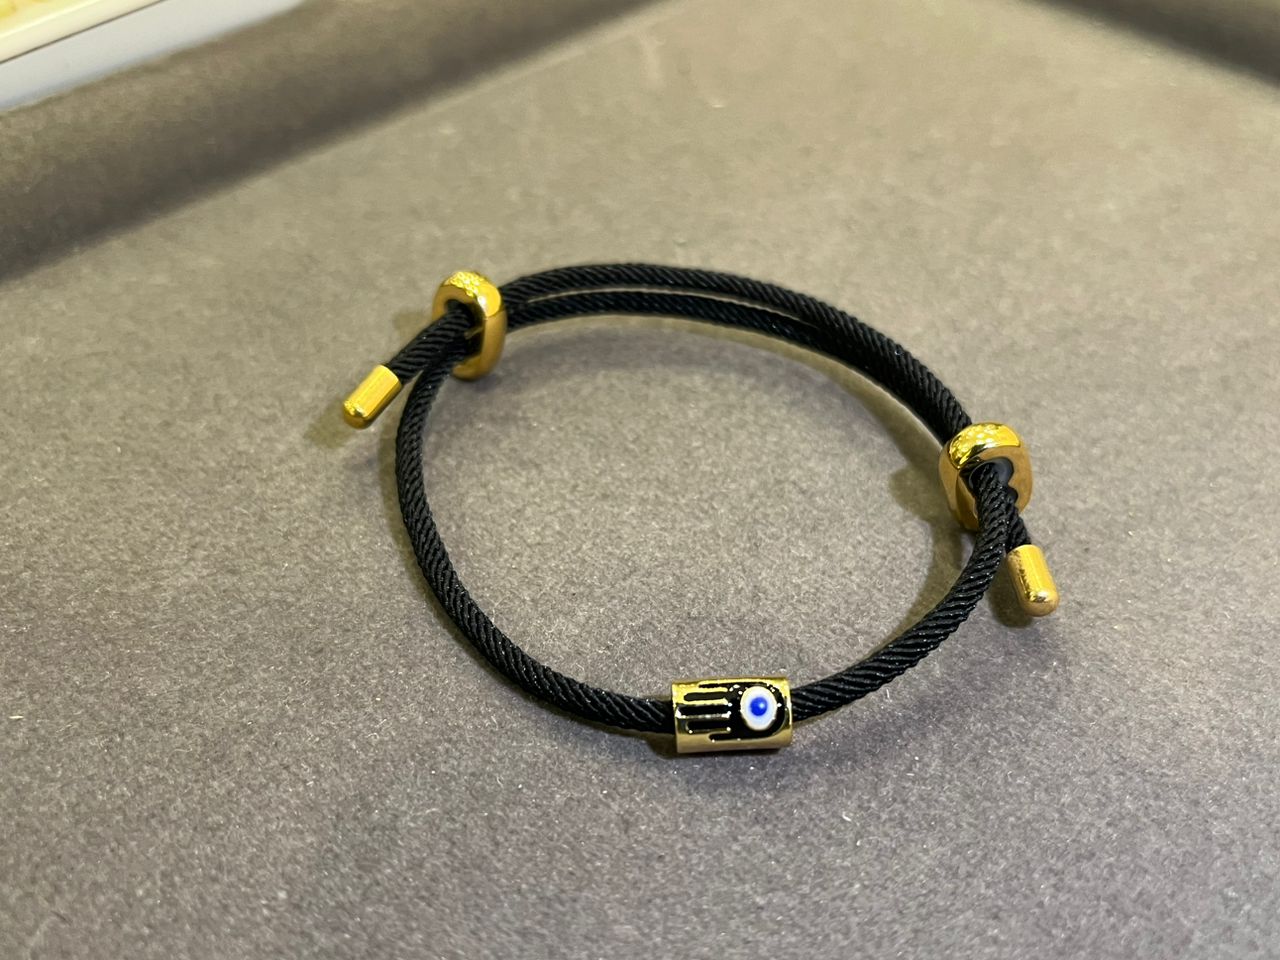 Classic Black Italian Rope Jewel in 24Kt Gold Plated with EVIL EYE Charm